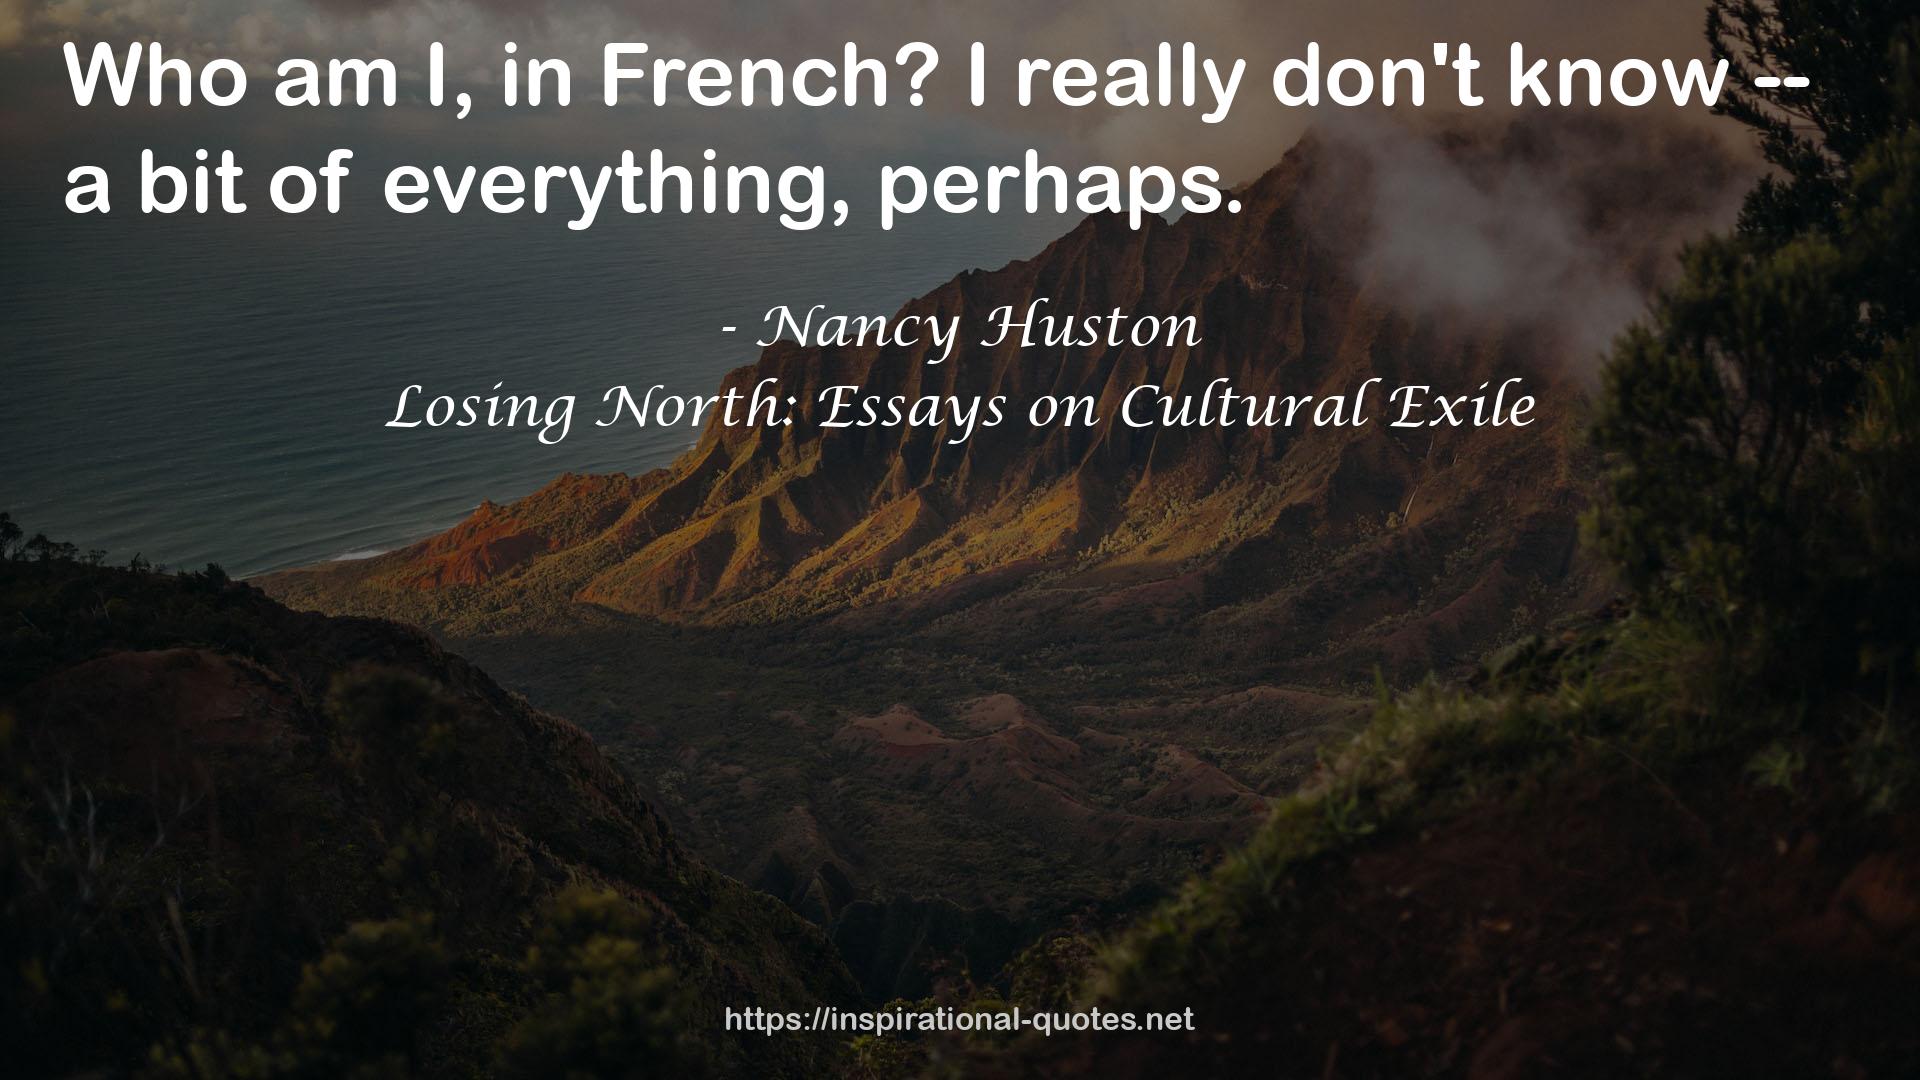 Losing North: Essays on Cultural Exile QUOTES